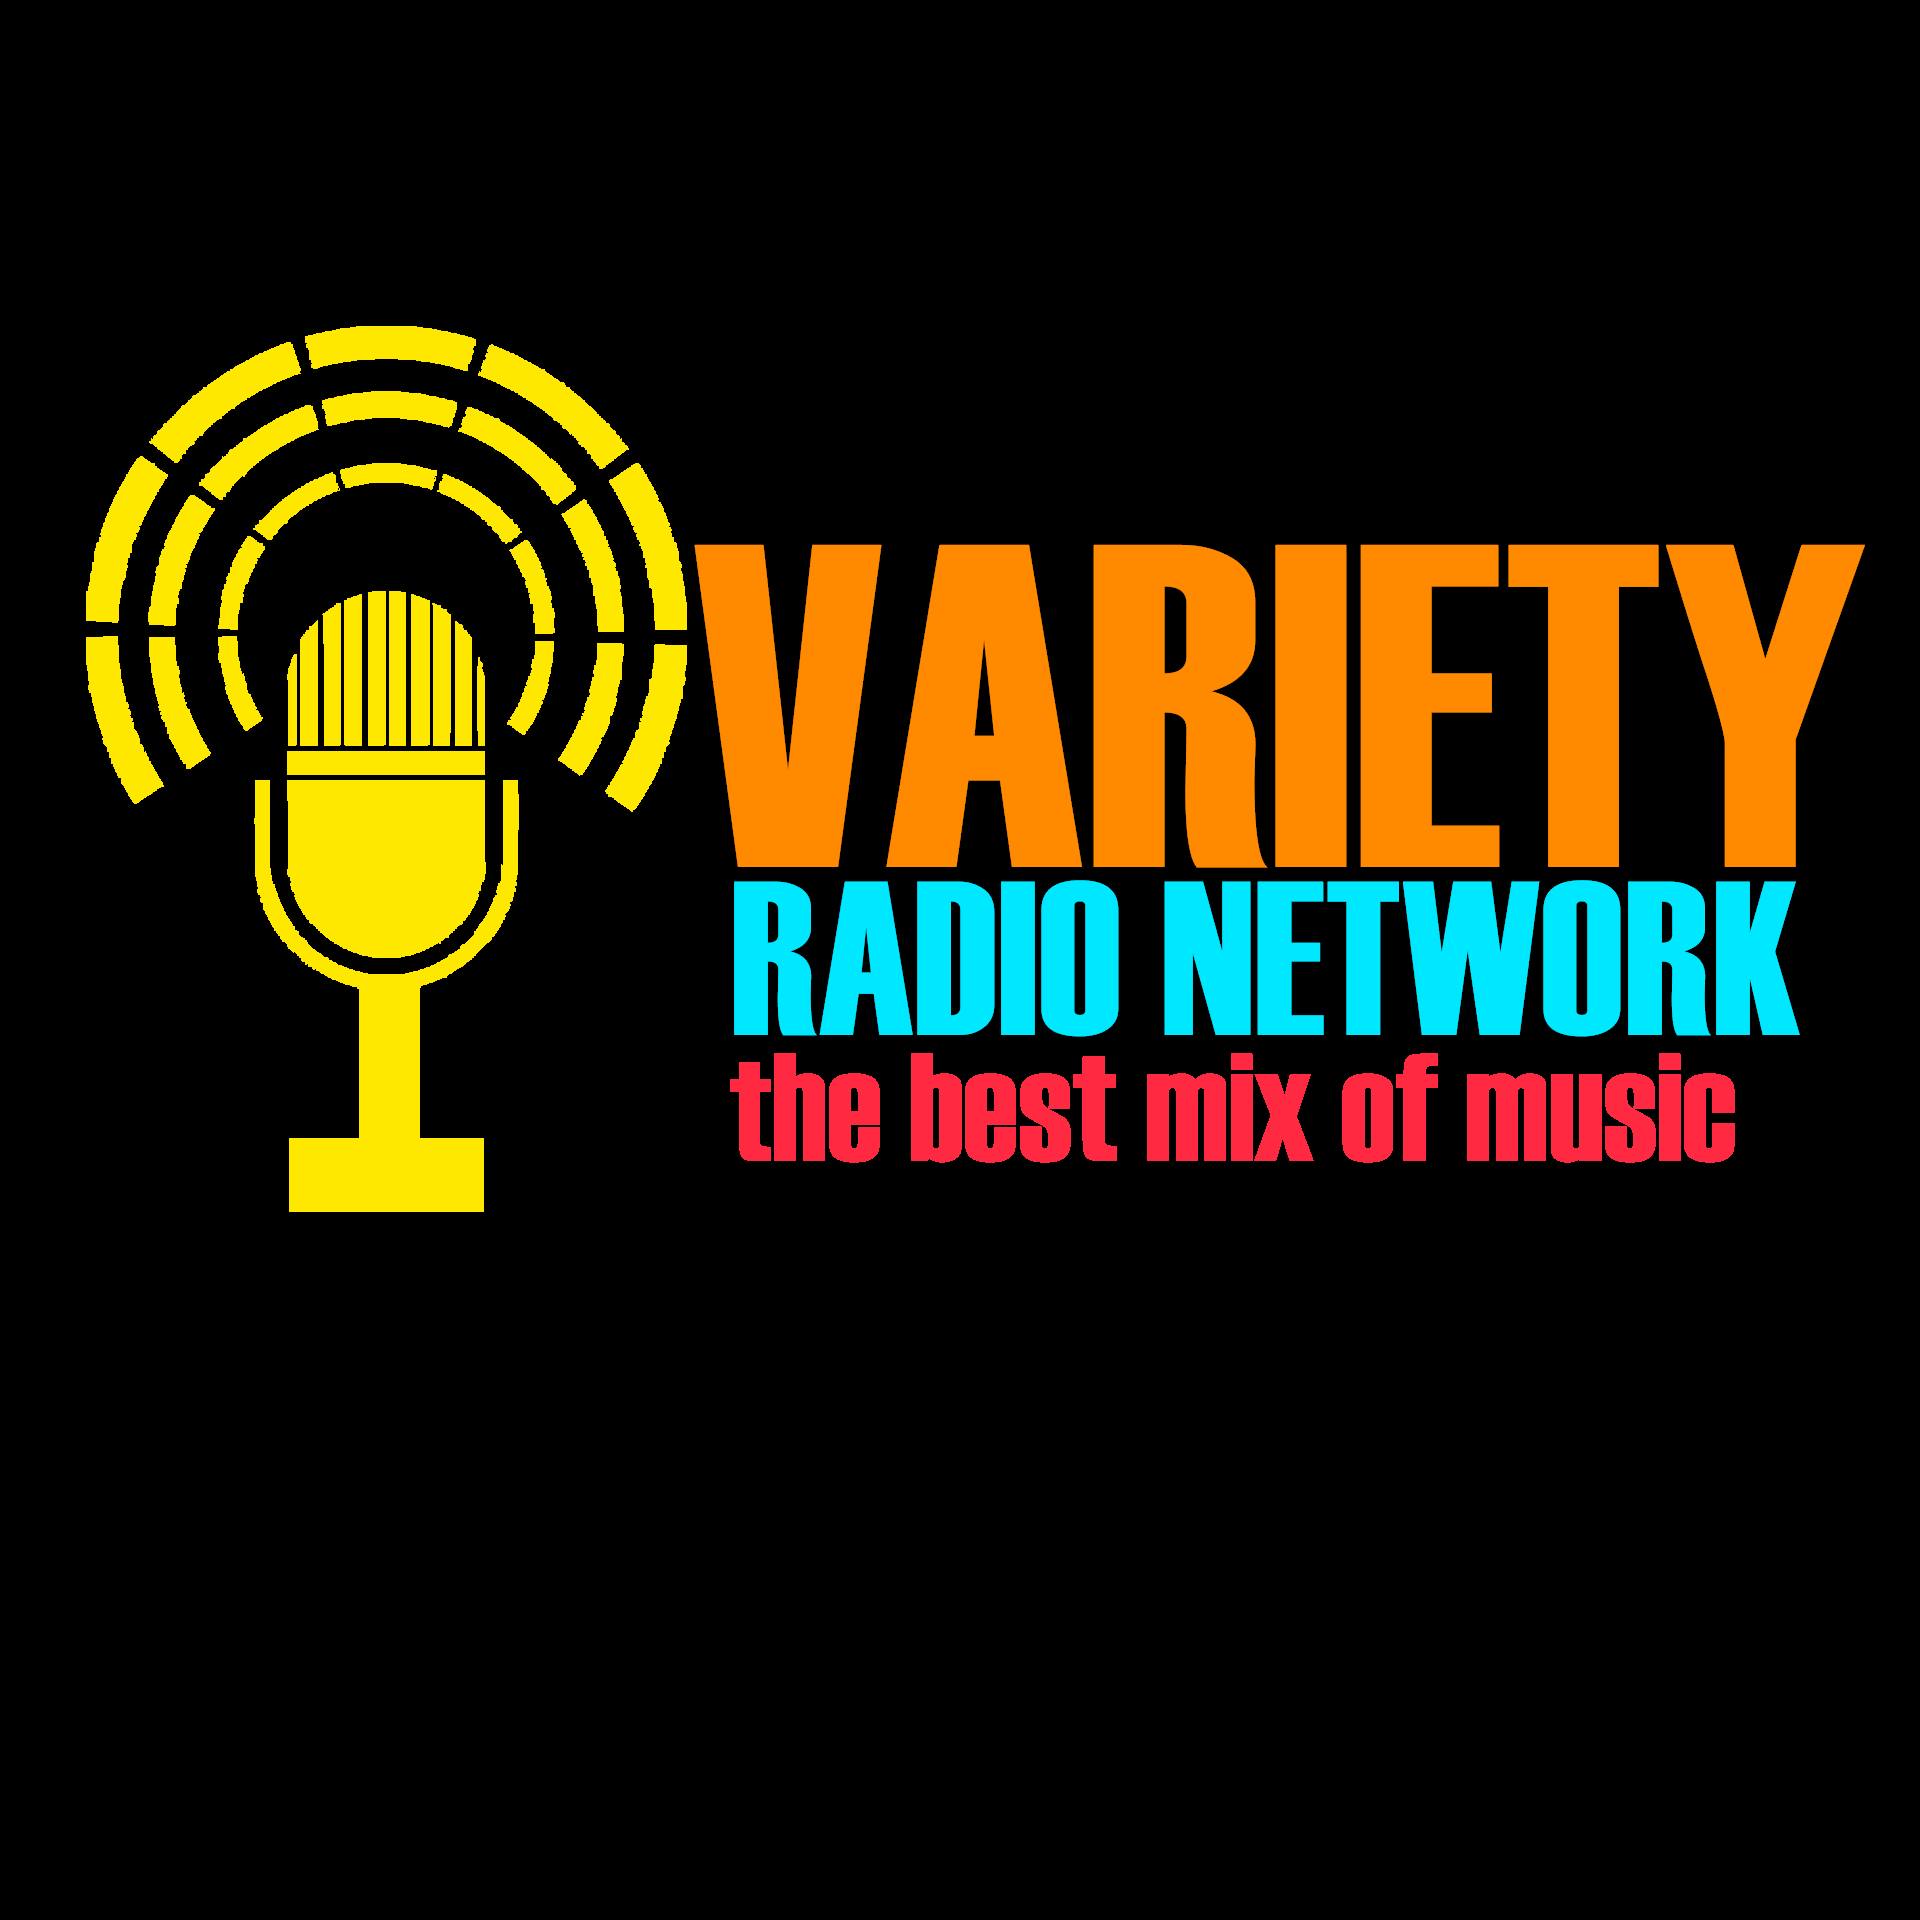 Art for The Variety Radio Network by WVRN-DB